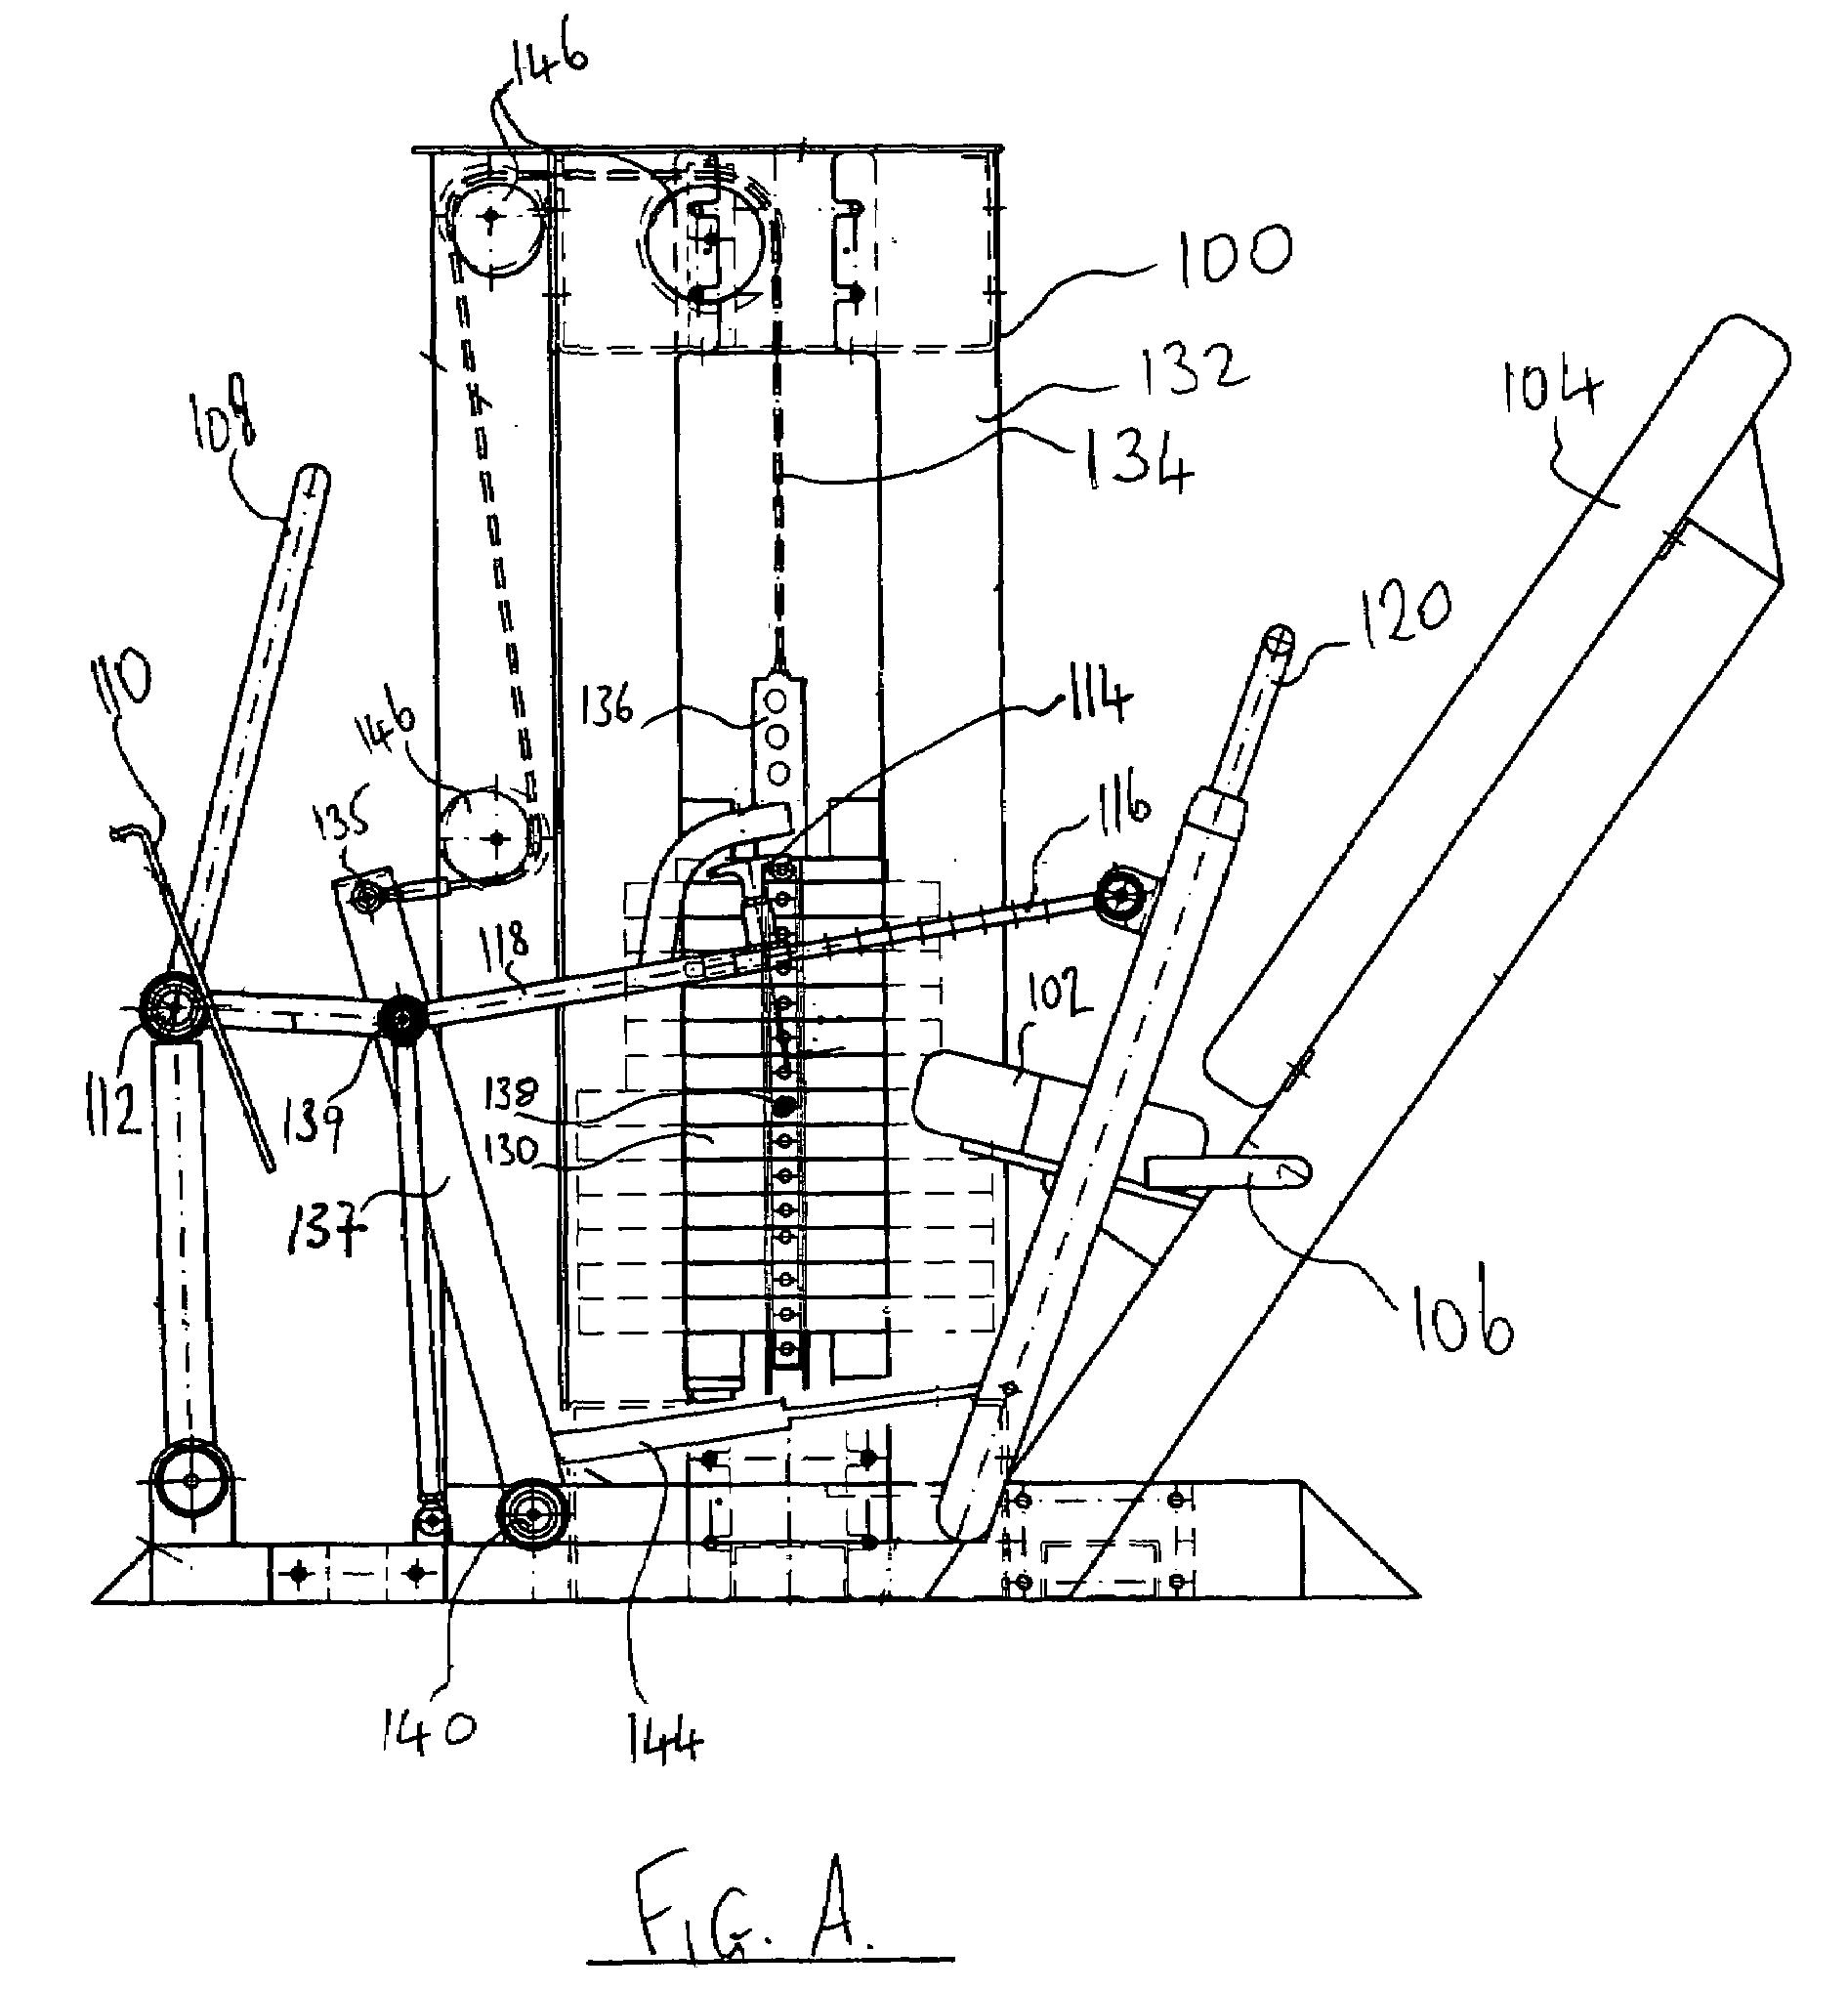 Method and device to enable and assist the elderly and females to exercise their leg and chest muscles